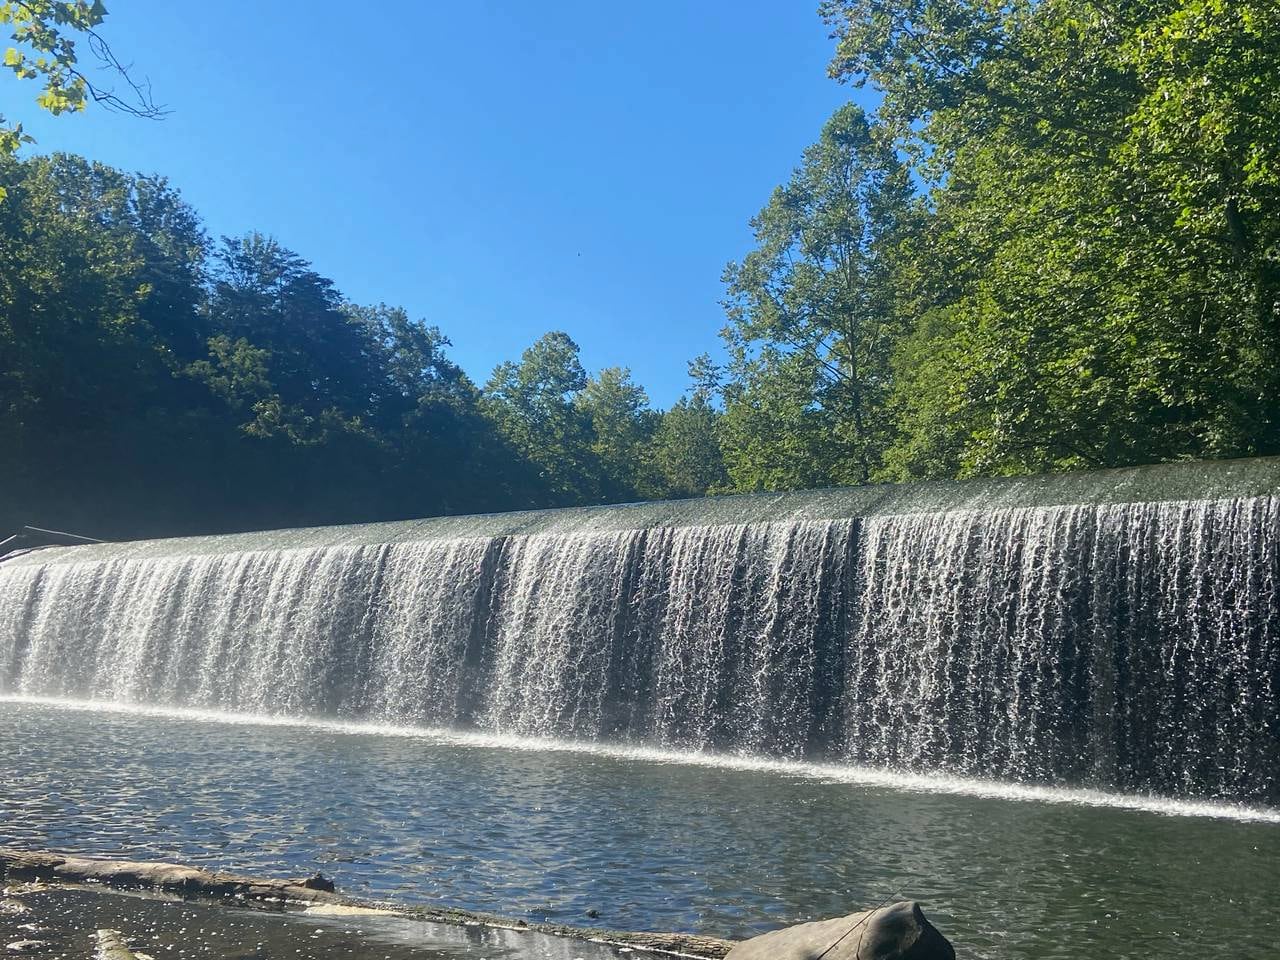 The Daniels Area Dam at Patapsco Valley State Park once helped supply power for nearby mills.